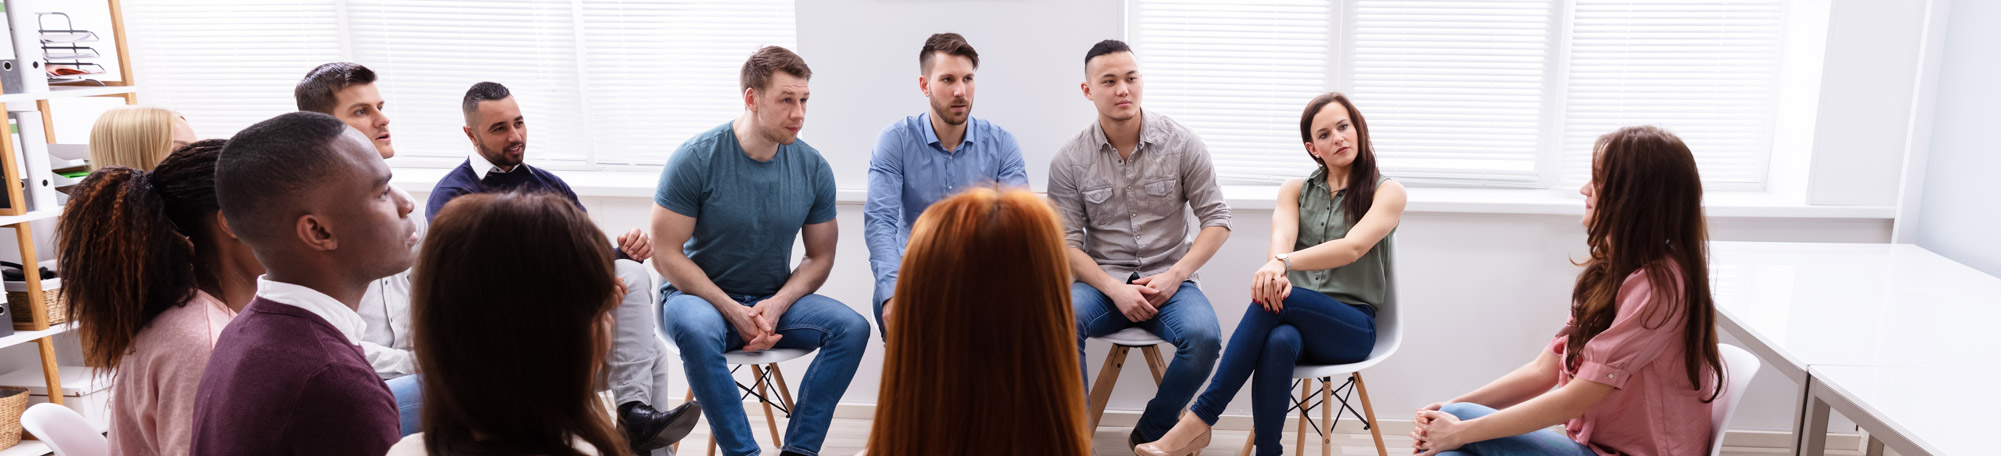 A diverse group of men and women sitting together in a circle for a group counselling session.